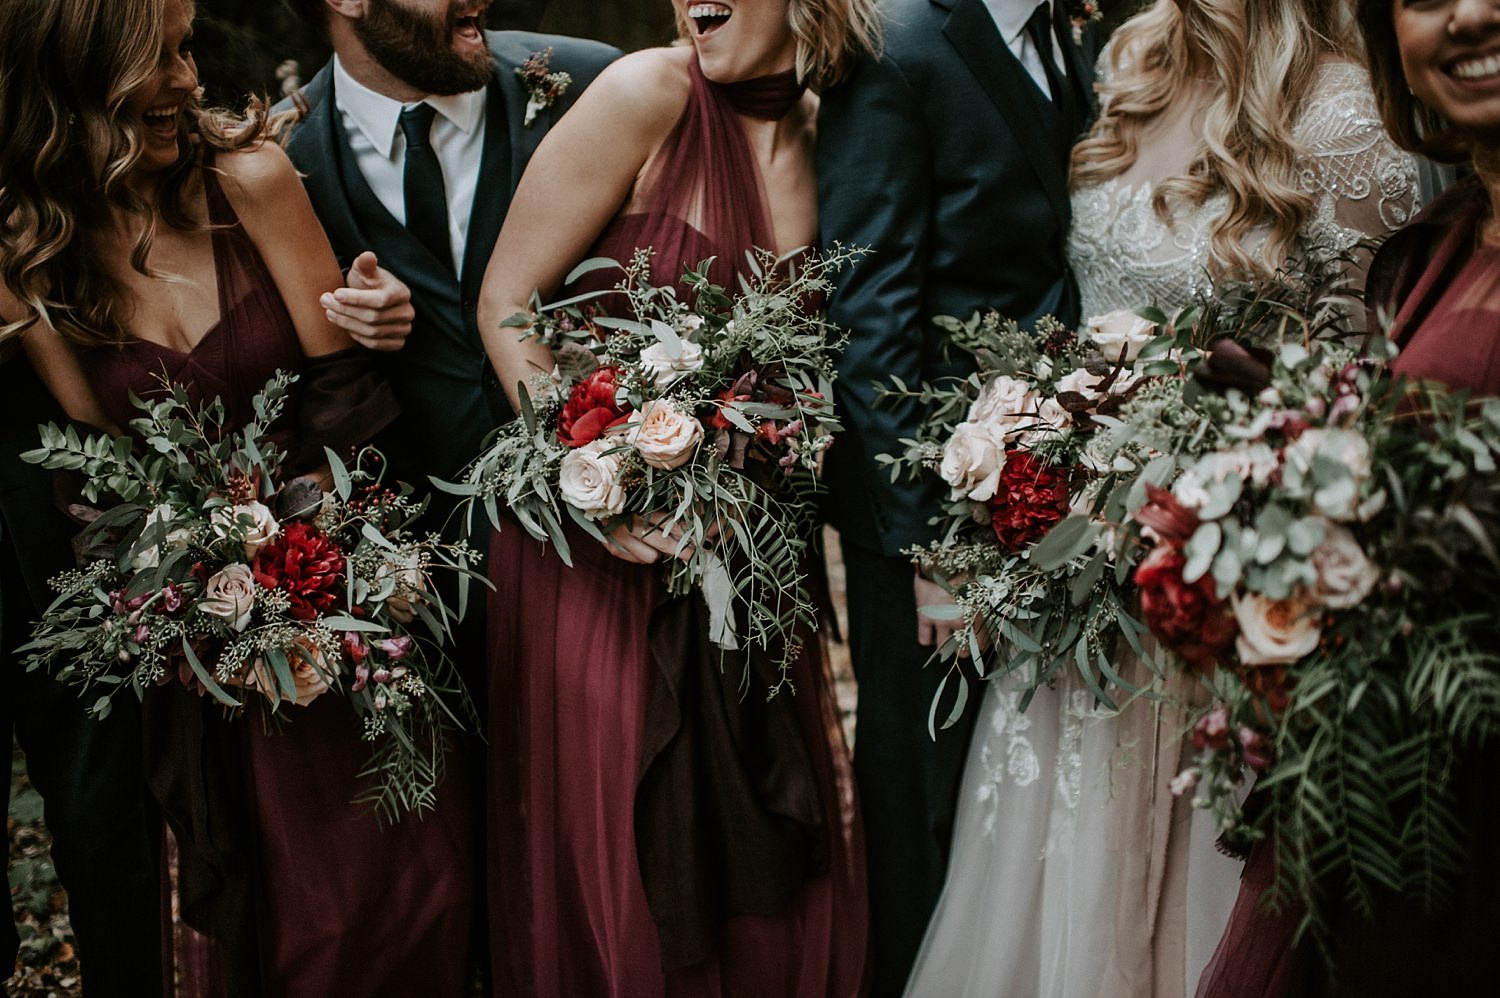 Rustic bridesmaids bouquets in marsala, blush, red, green and ivory